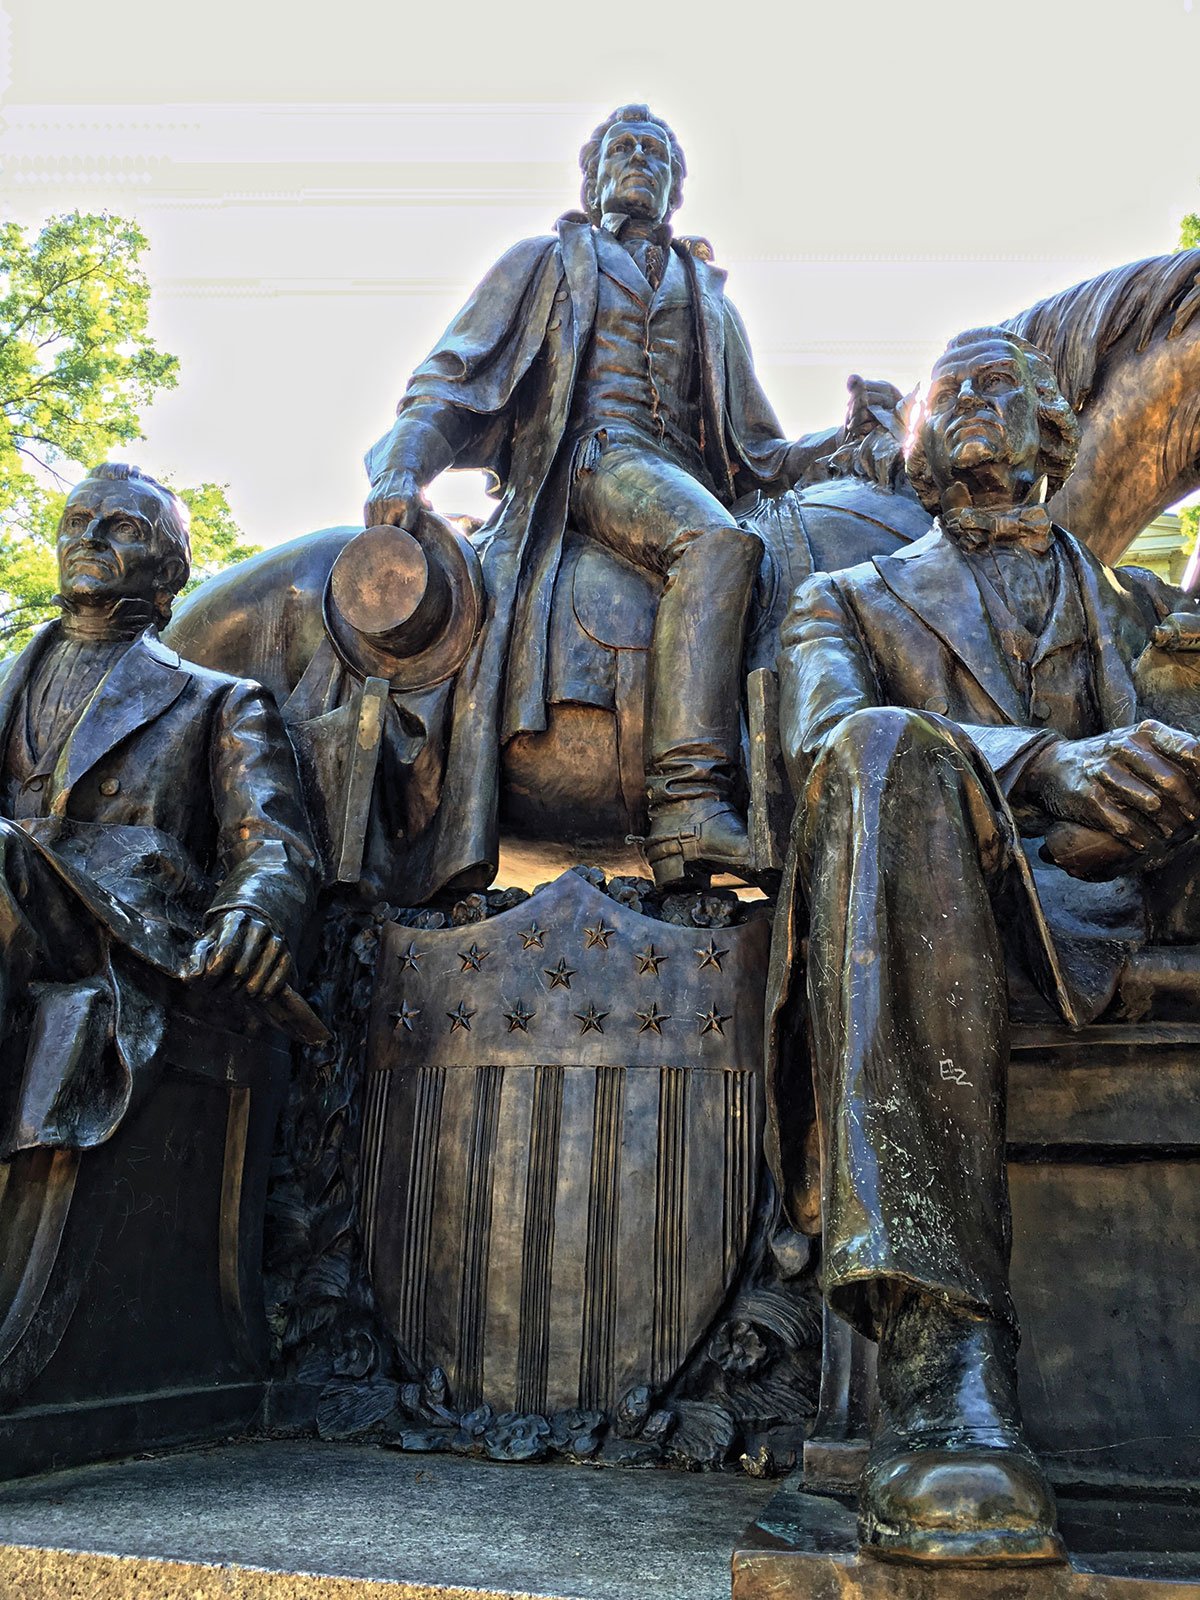 North Carolina's Three Presidents Monument in Raleigh's Historic Capitol Square